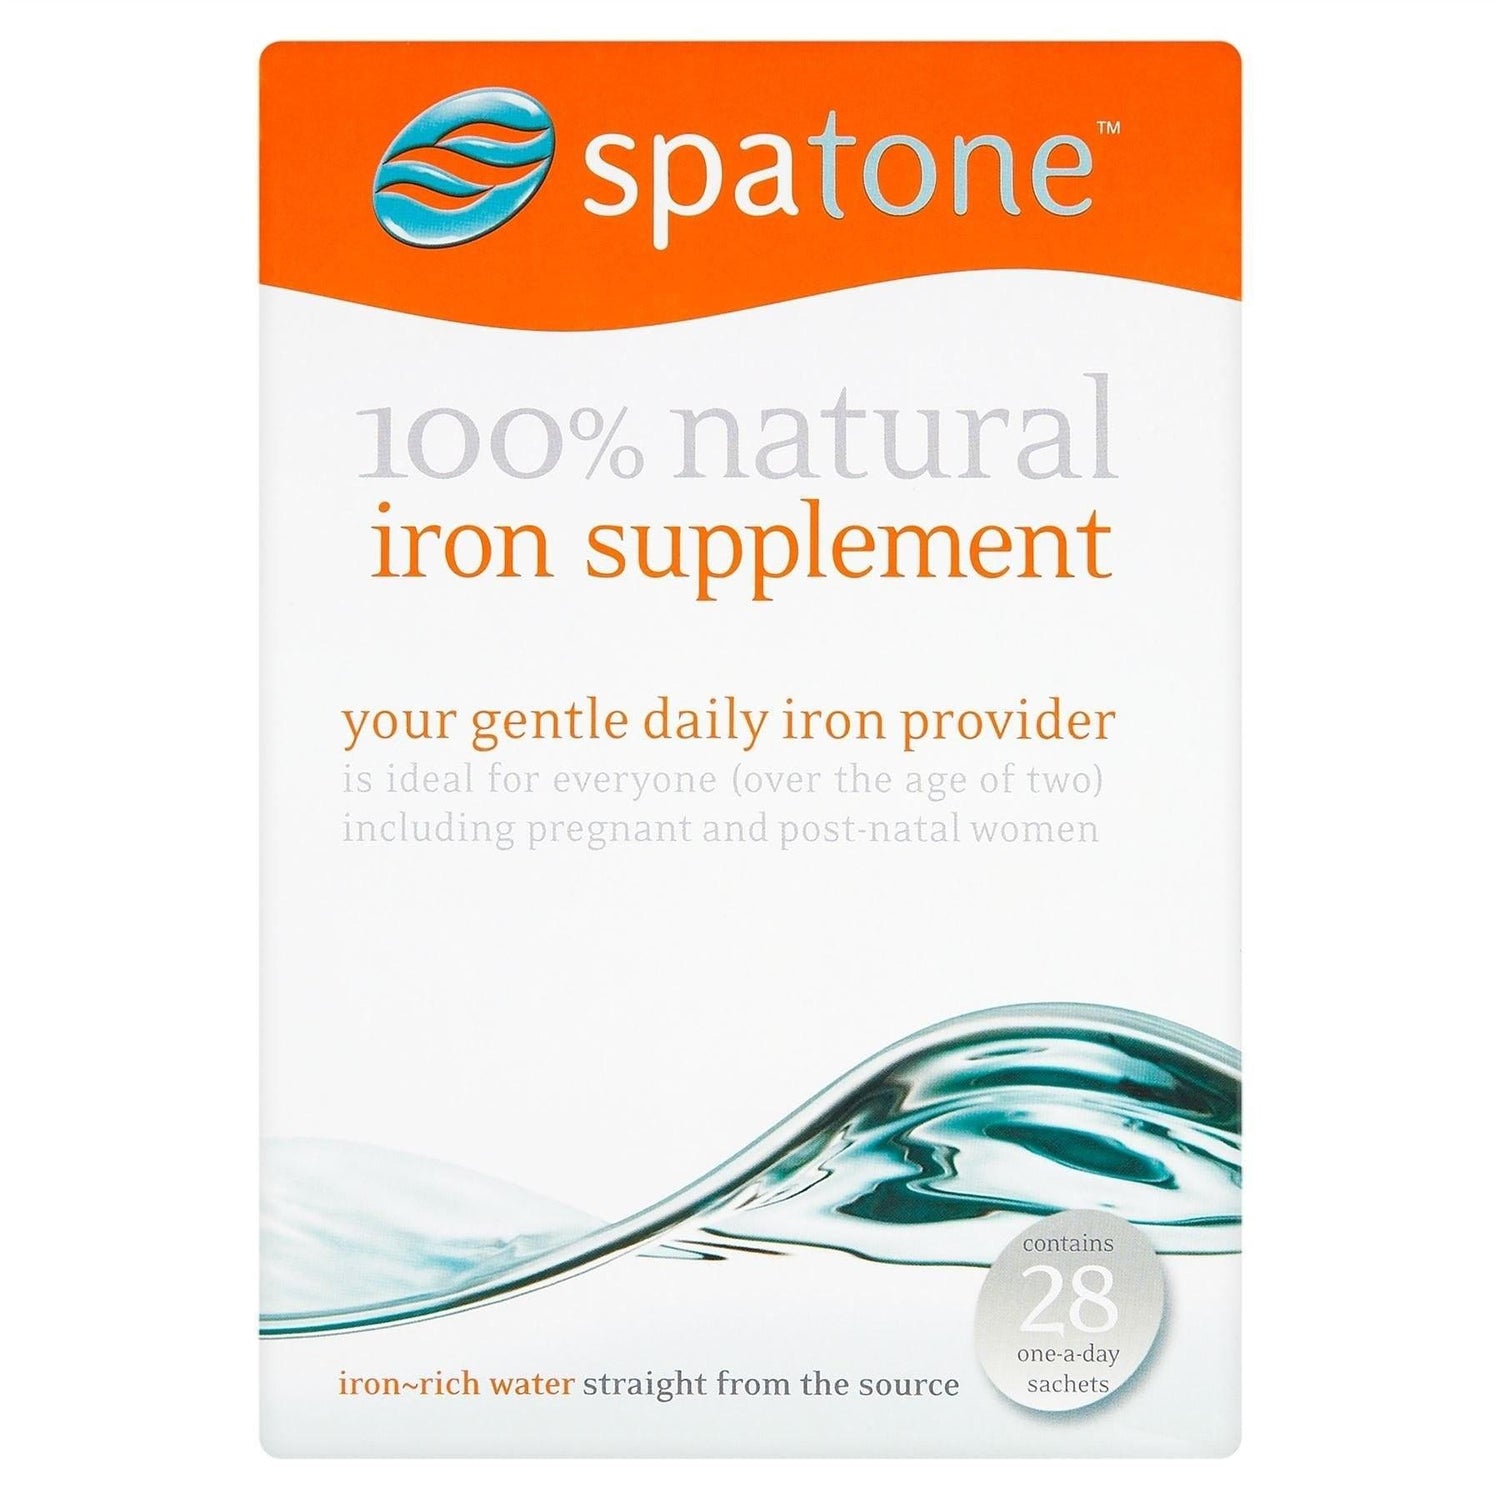 Spatone Products Online